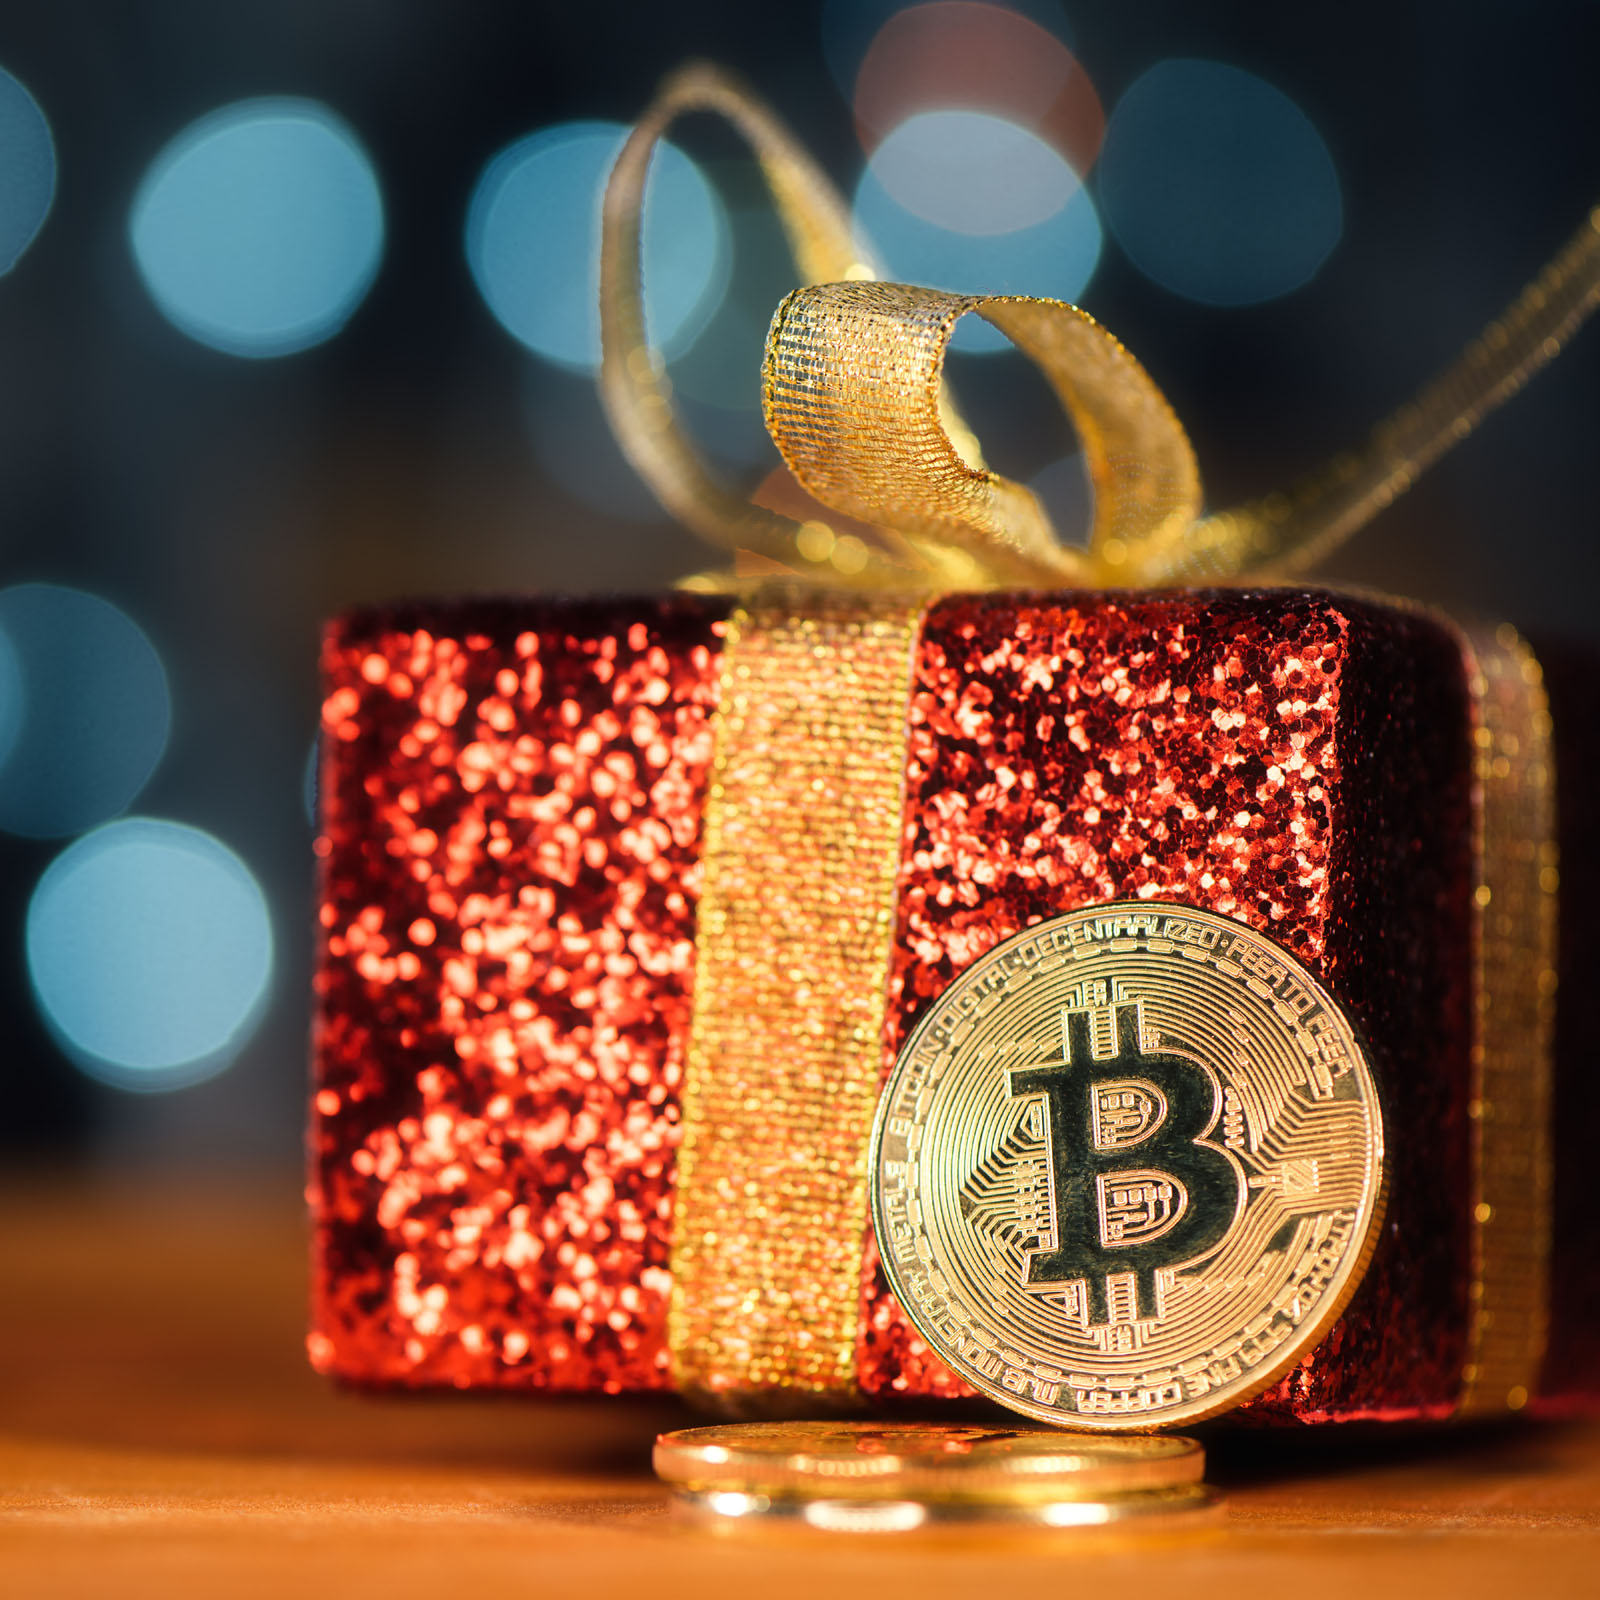 Russians Think Bitcoin Makes a Great Present